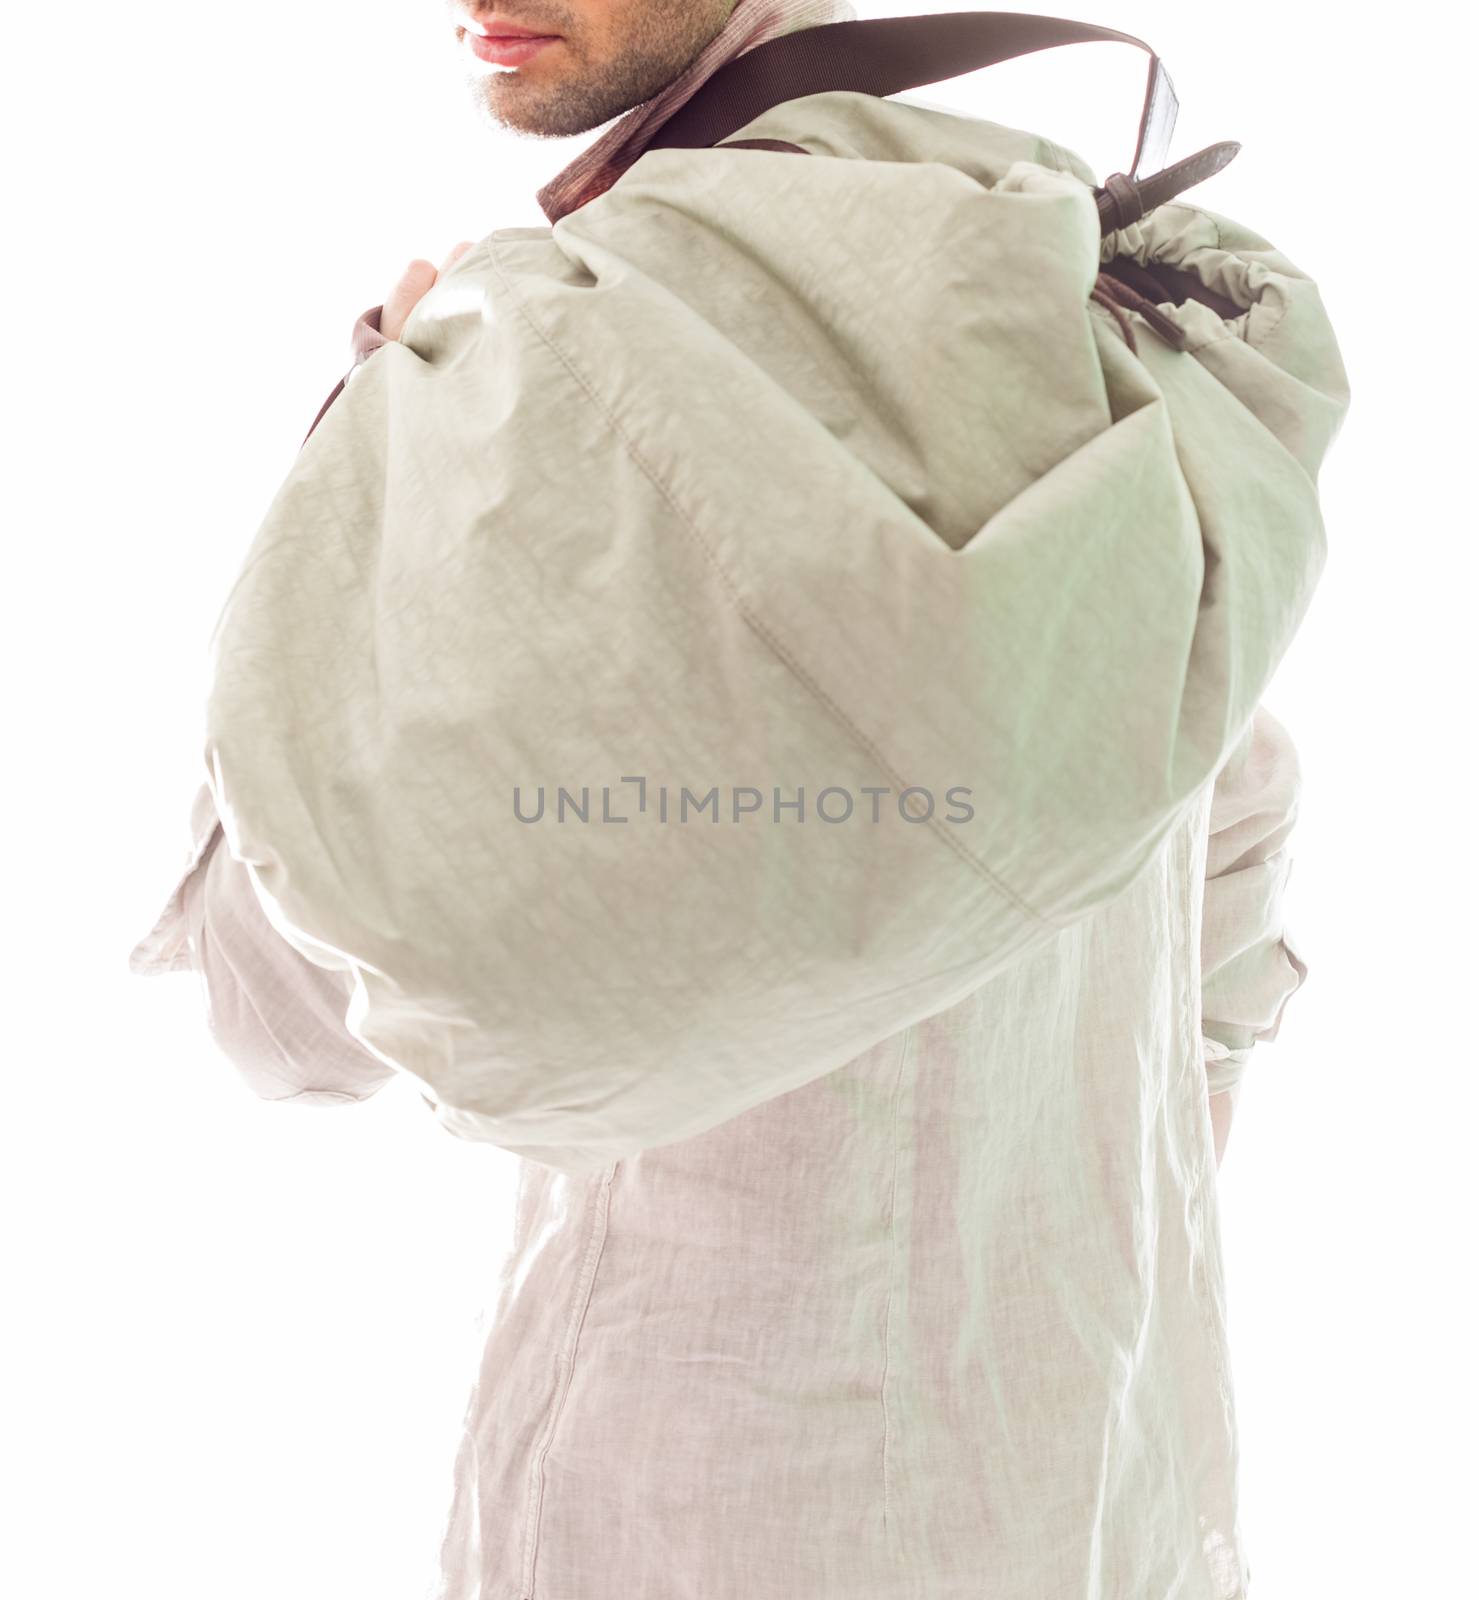 Elegant young handsome man in white clothing and bag. Studio fashion portrait.